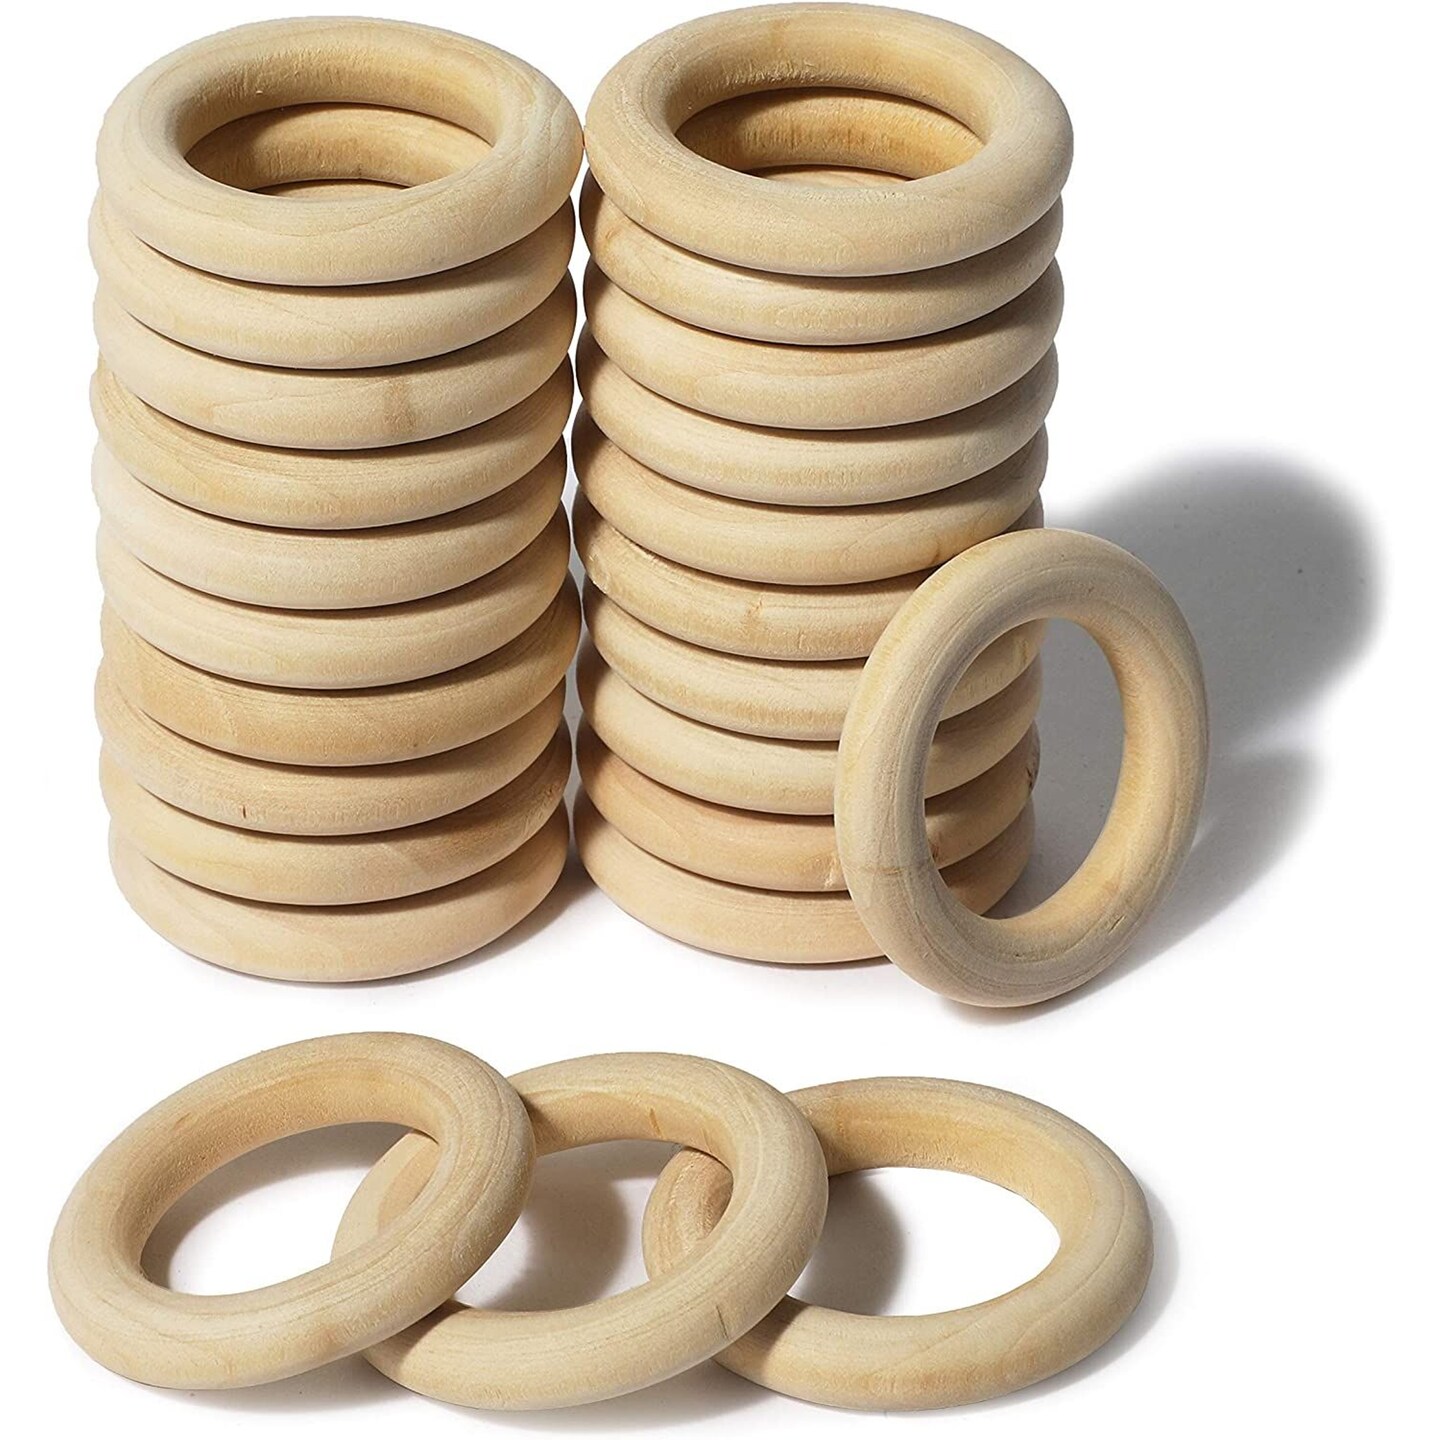 Wooden Rings for Crafts and Macrame, Wood Rings (1.4 in, 39mm, 24